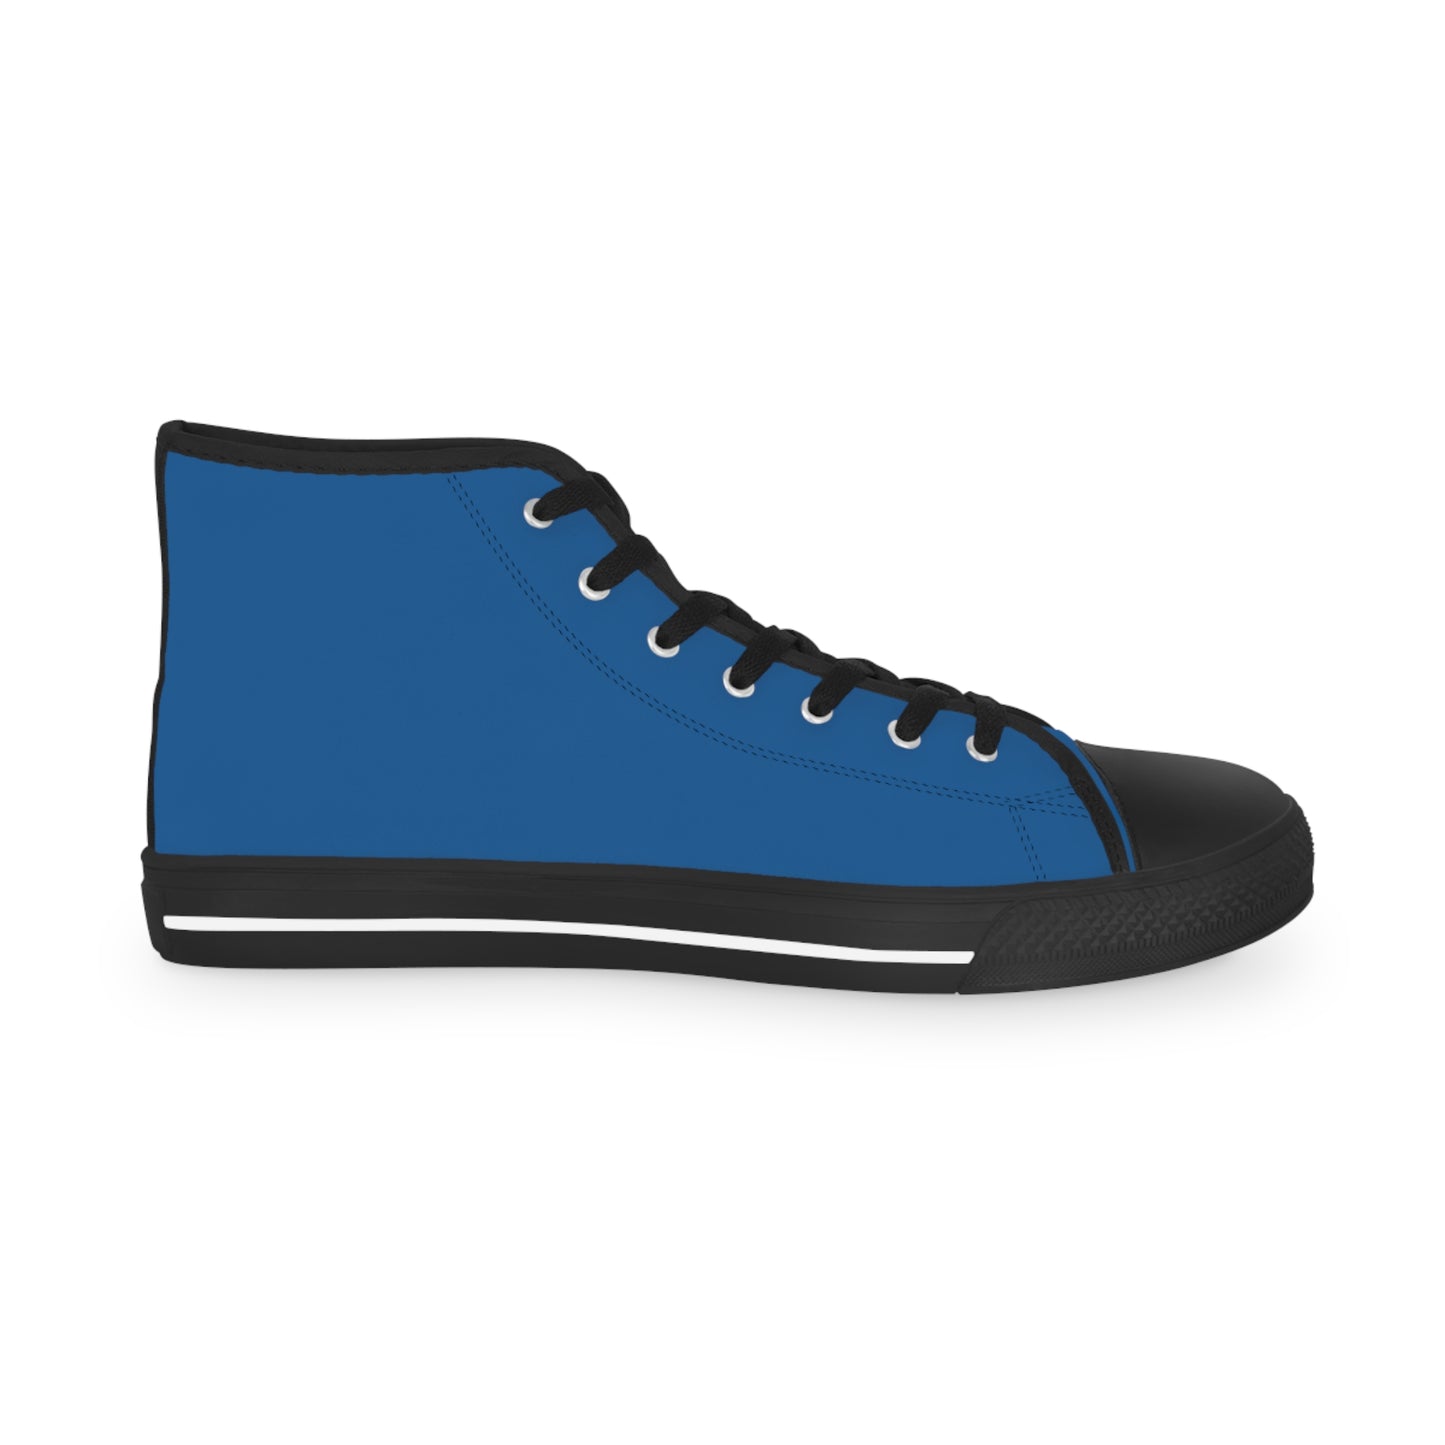 Men's Canvas High Top Solid Color Sneakers - Rich Blue US 14 White sole